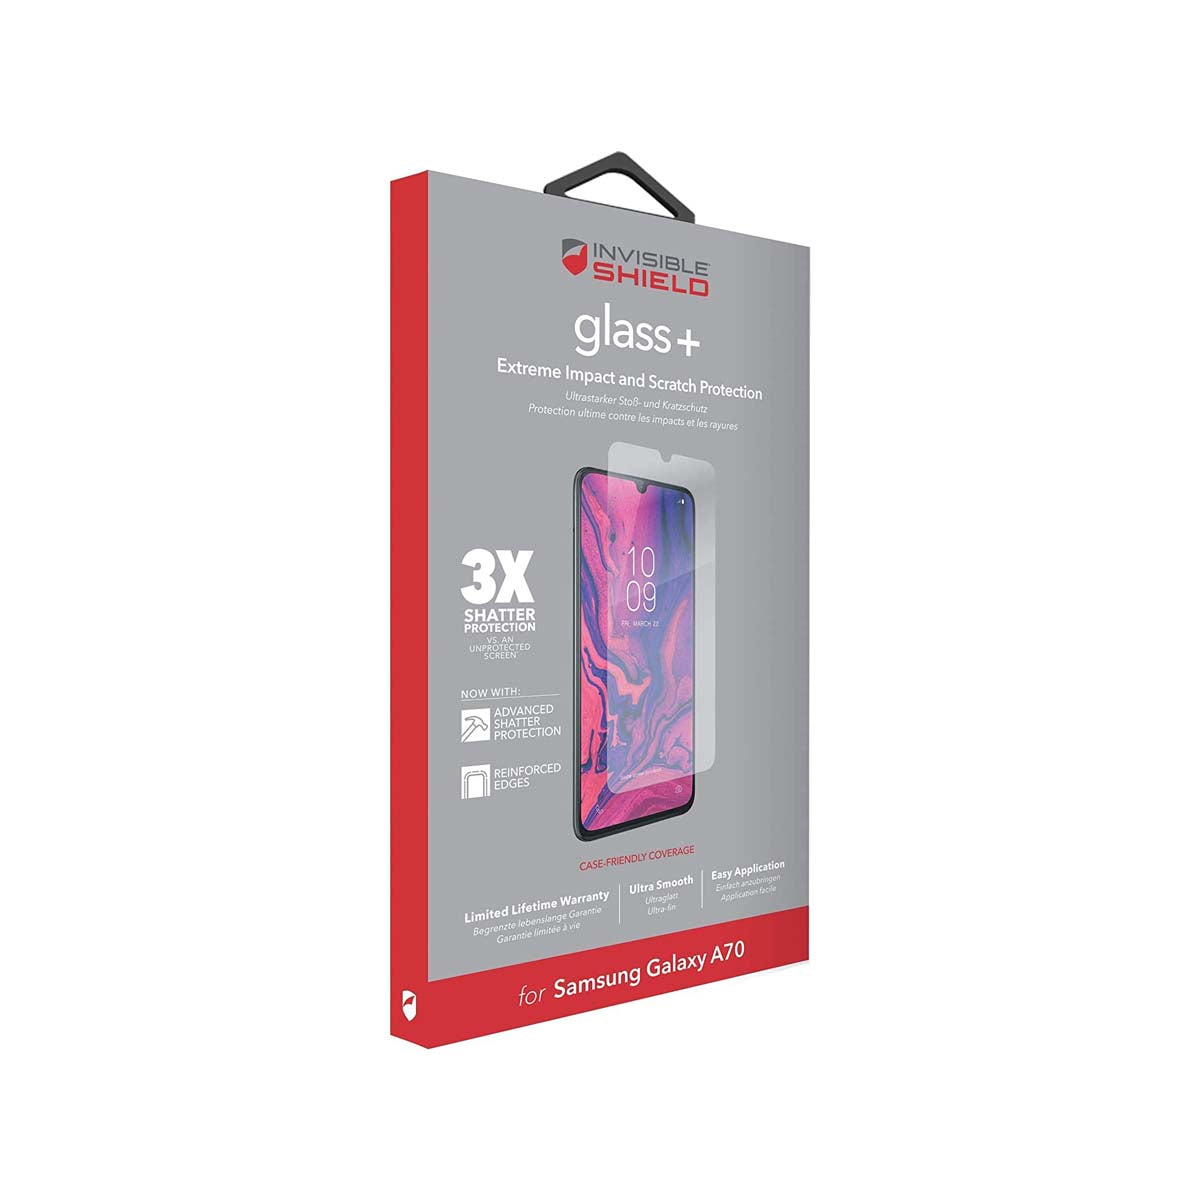 InvisibleShield Glass + Phone Screen Protector for Samsung A70 - Clear.